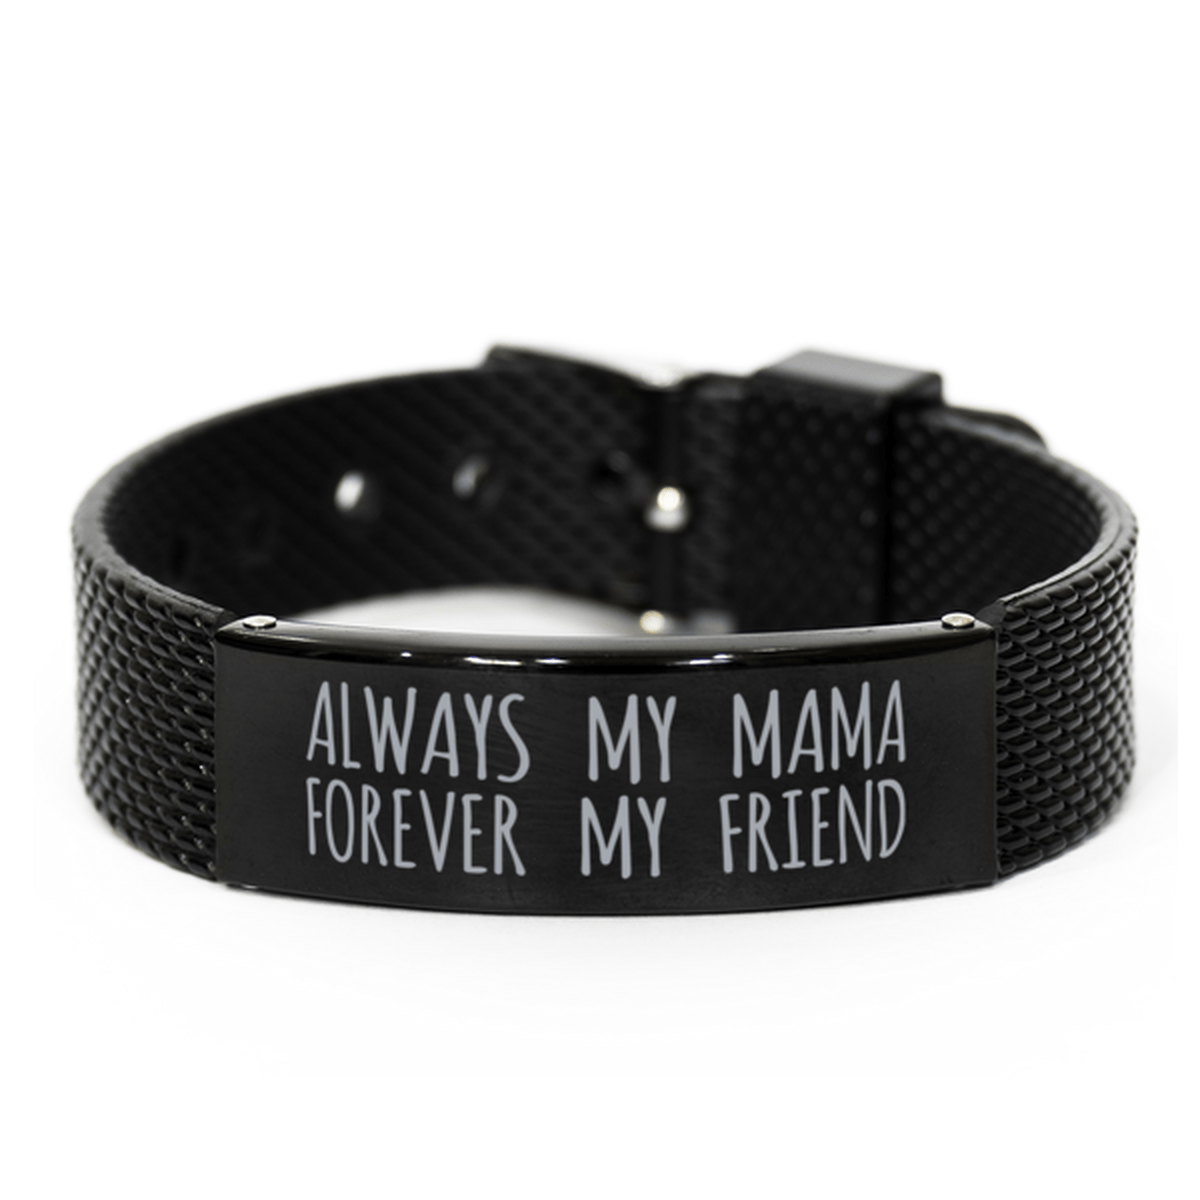 Inspirational Mama Black Shark Mesh Bracelet, Always My Mama Forever My Friend, Best Birthday Gifts for Family Friends